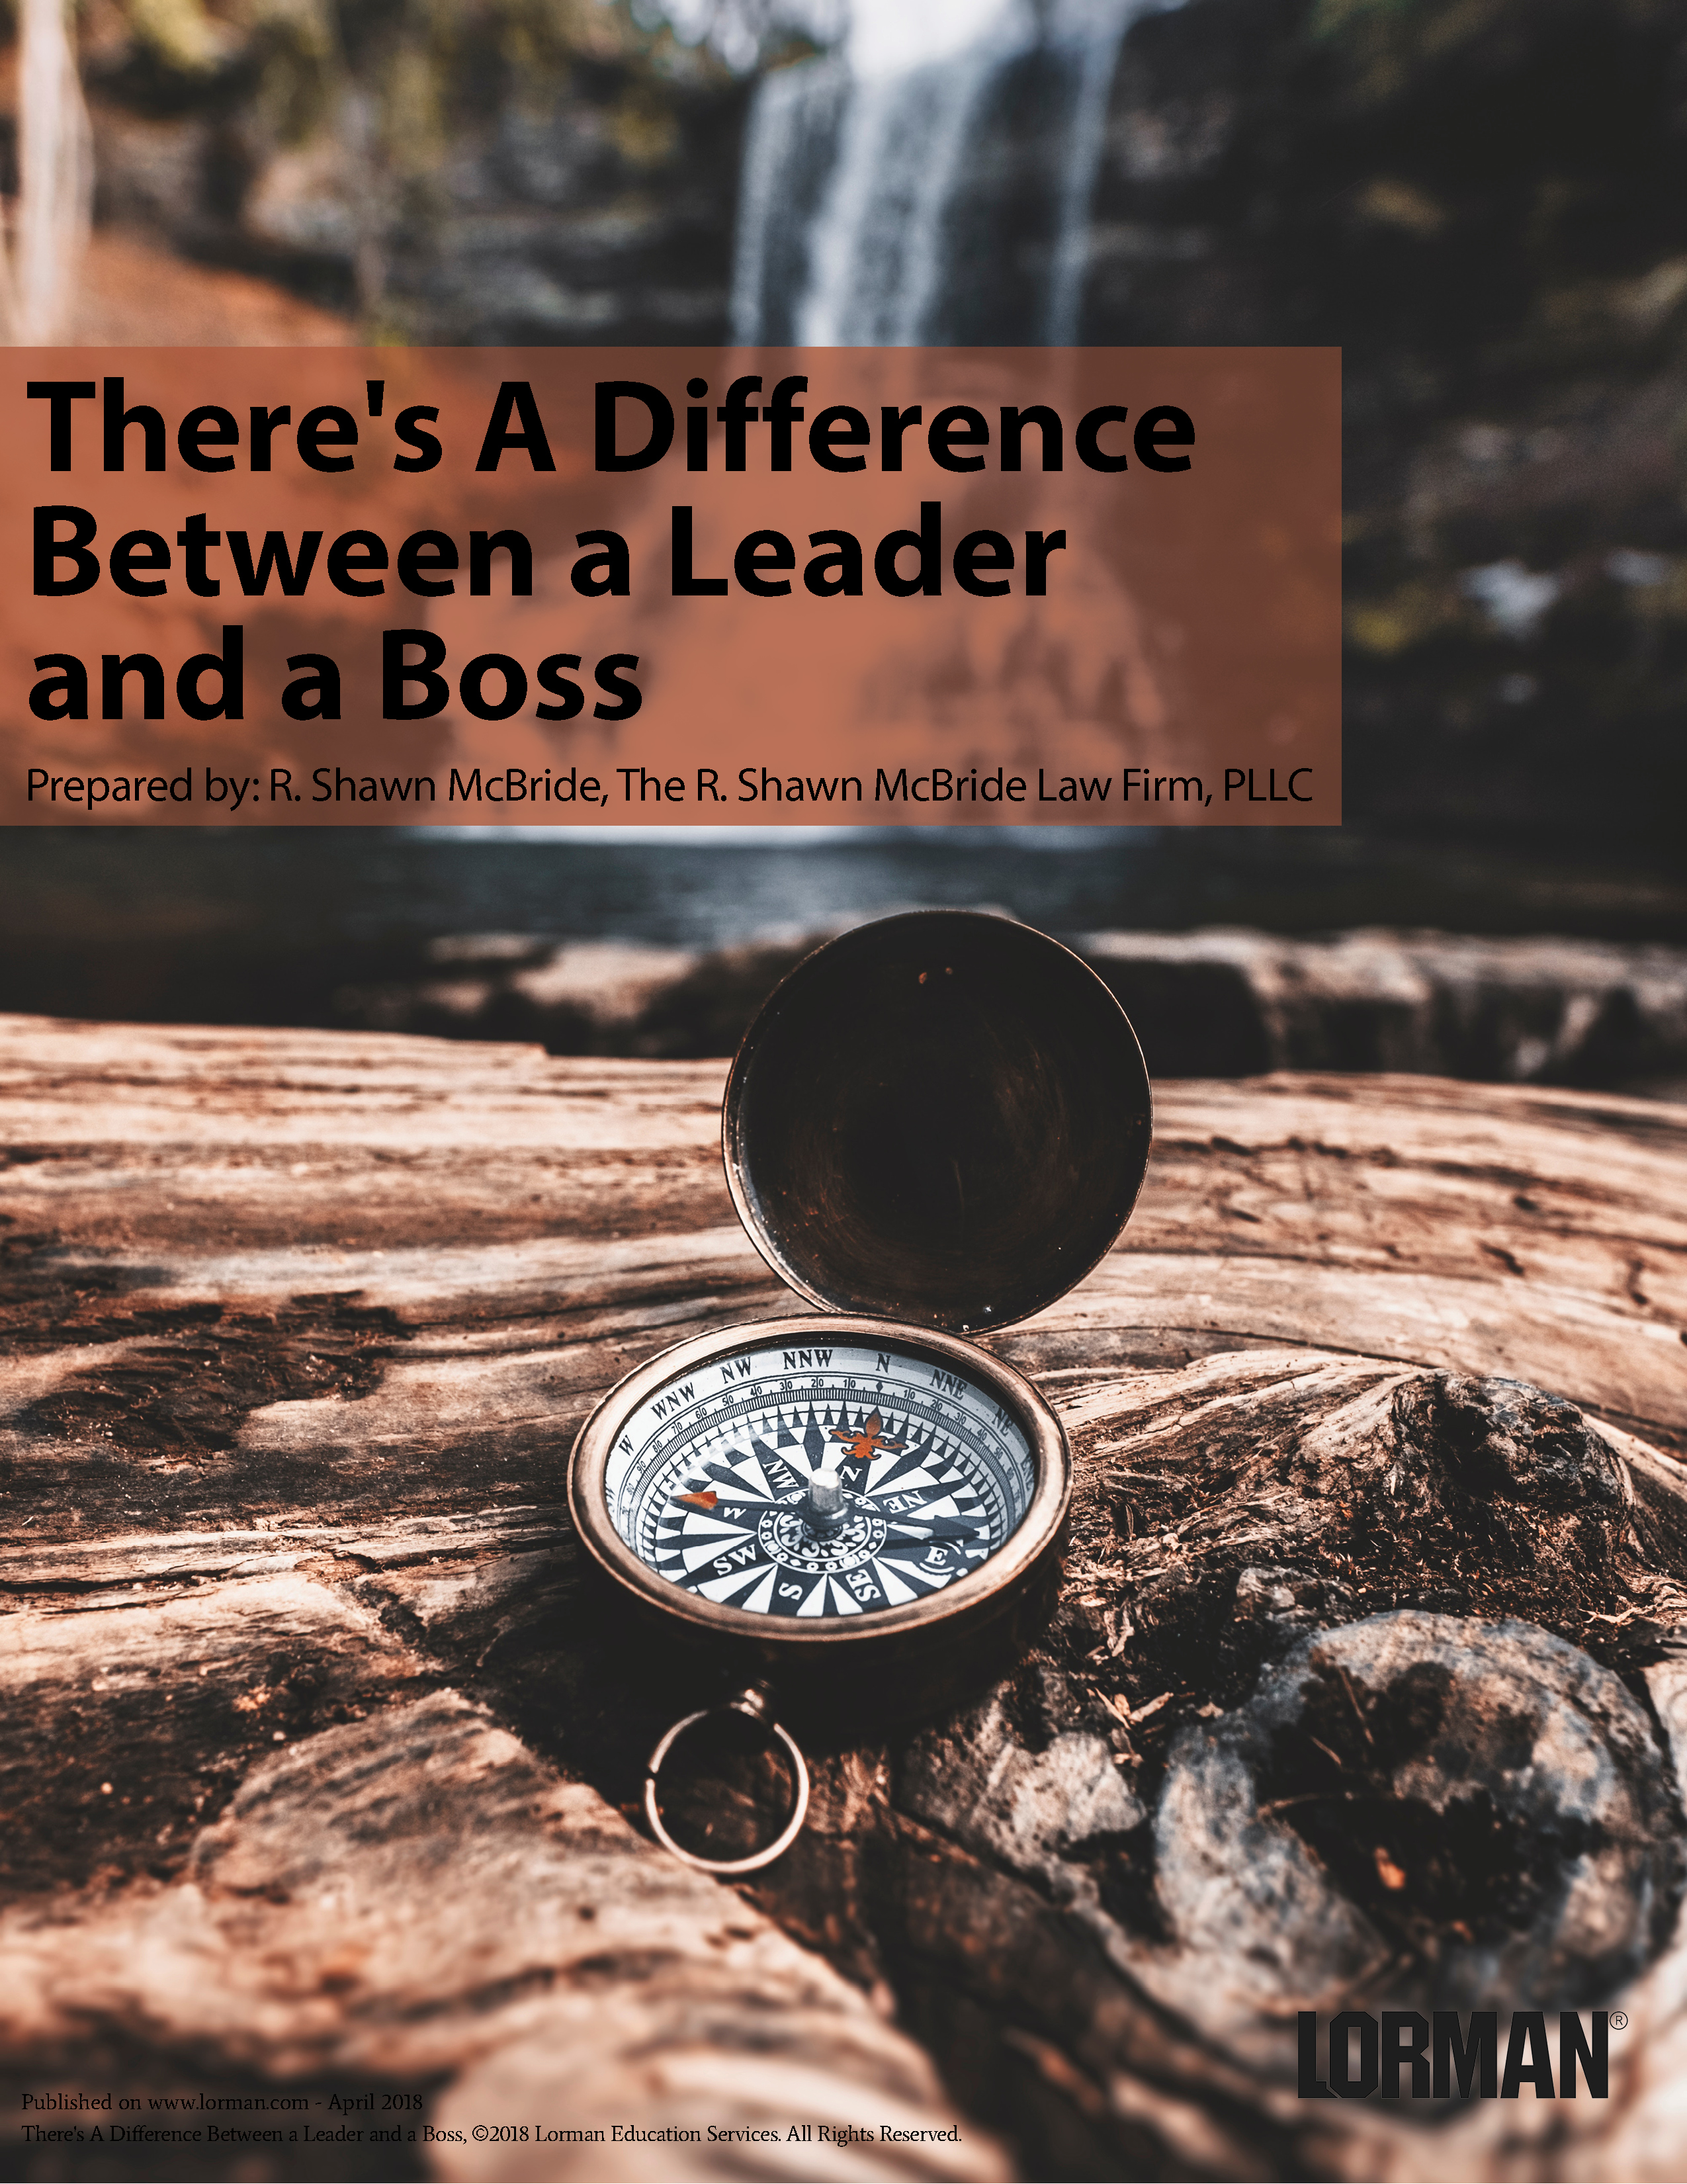 There's A Difference Between a Leader and a Boss